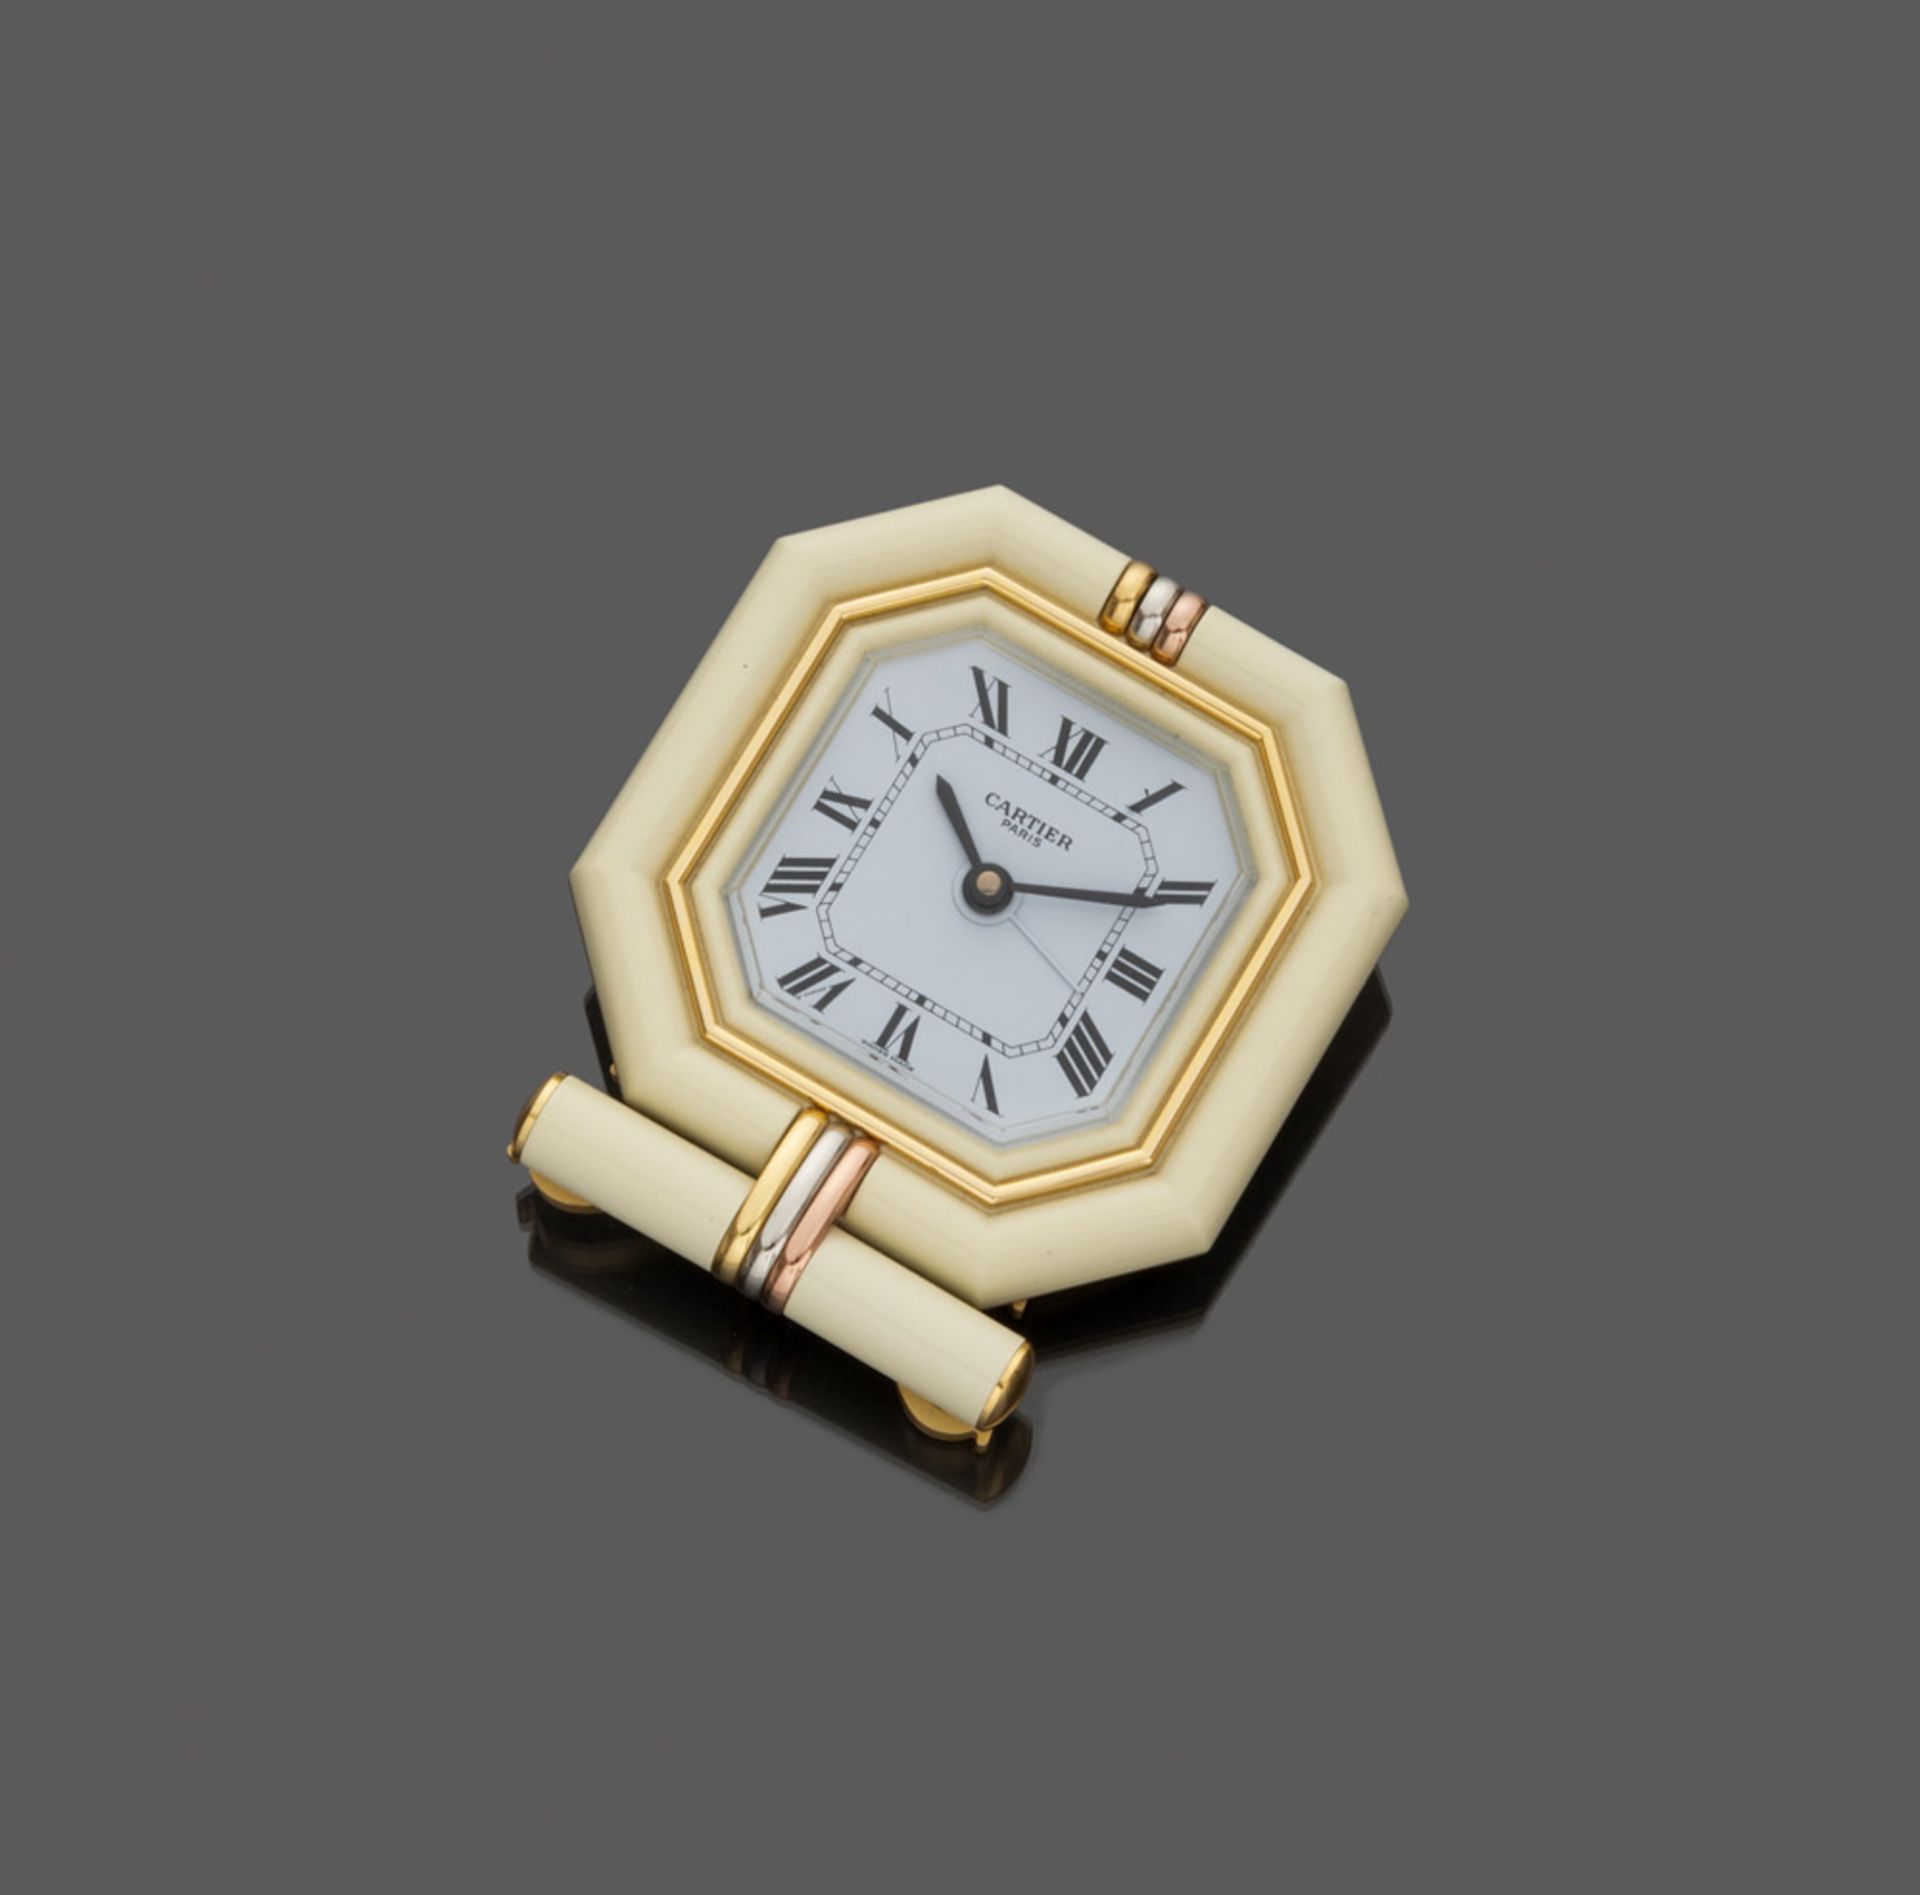 TABLE watch PENDULETTE MUST DE CARTIER in brass and enamel, with rolled insertions in yellow gold,